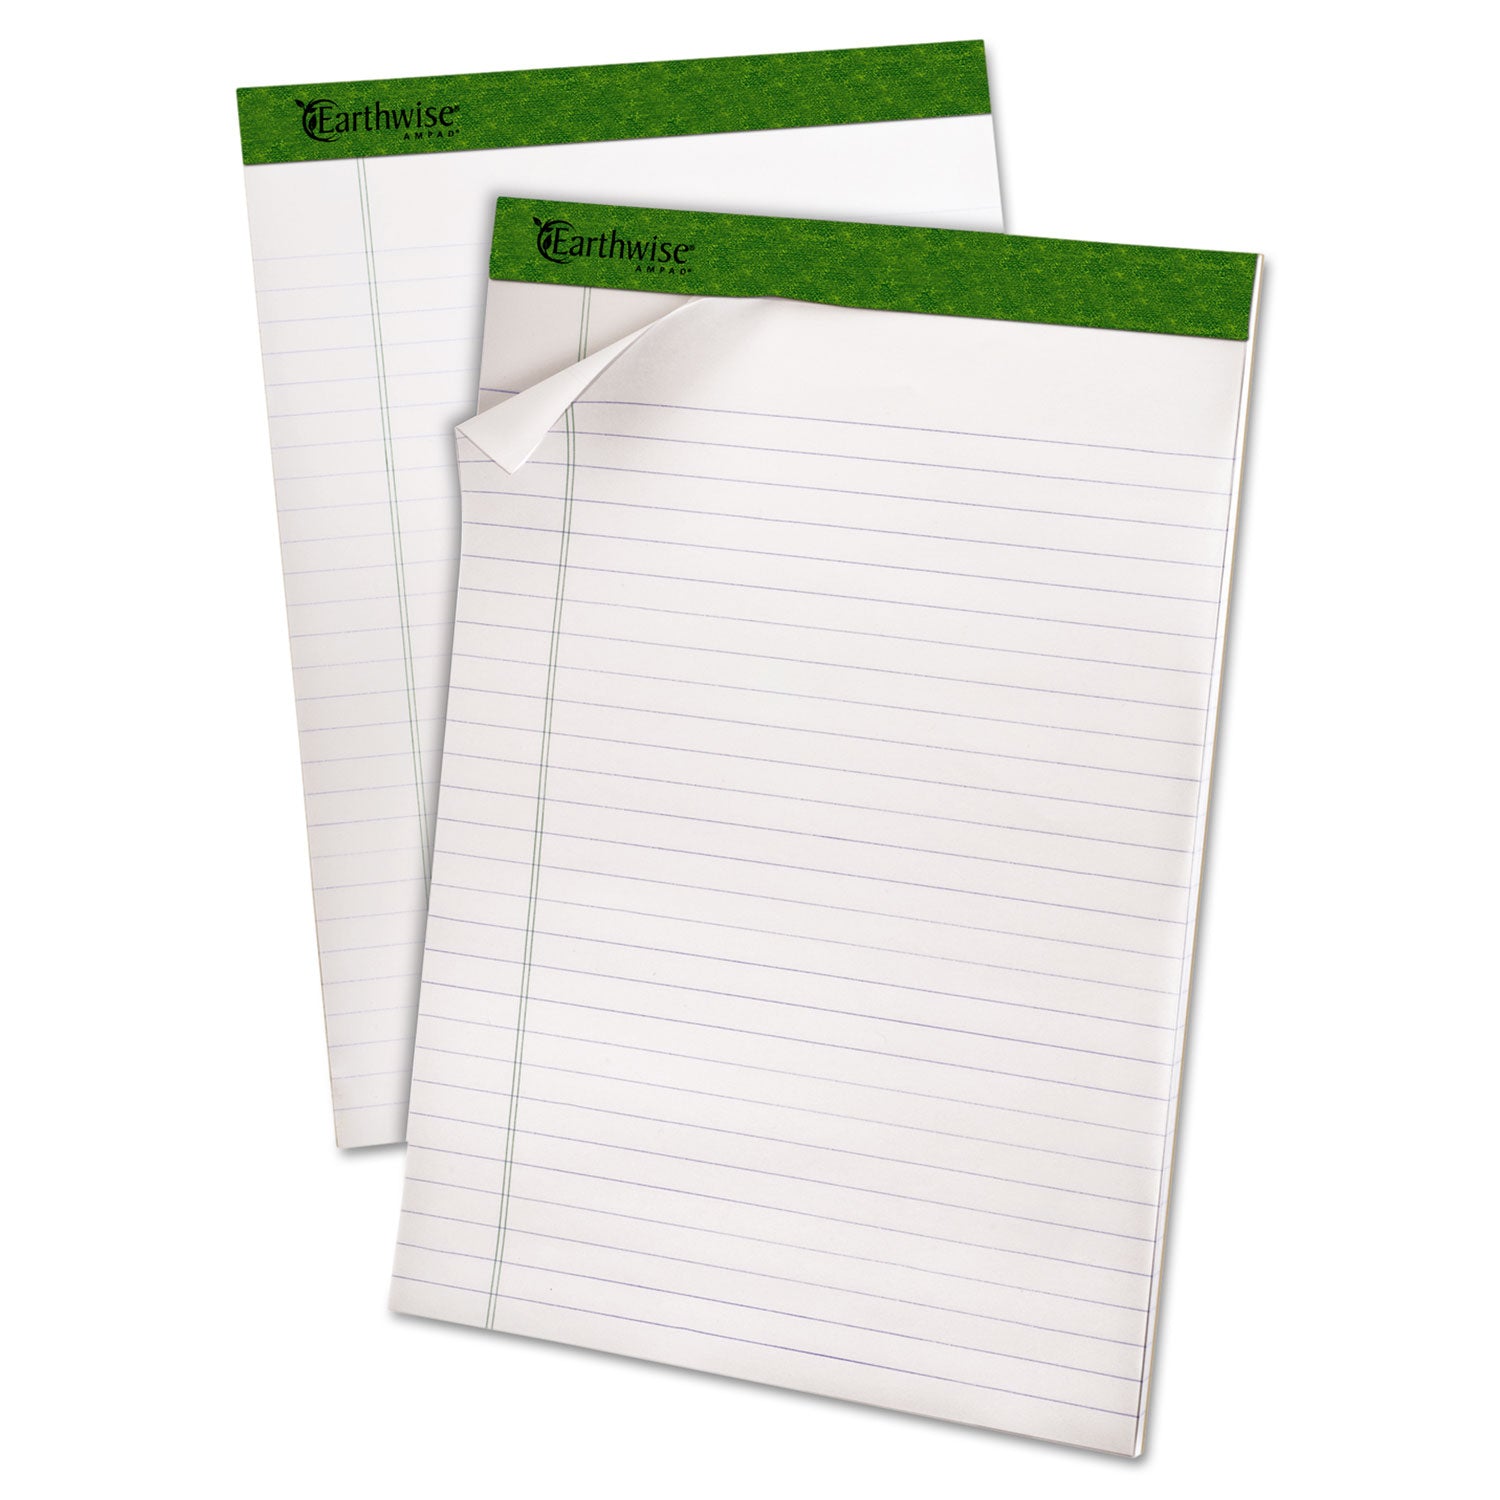 Earthwise by Ampad Recycled Writing Pad, Wide/Legal Rule, Politex Sand Headband, 40 White 8.5 x 11.75 Sheets, 4/Pack - 